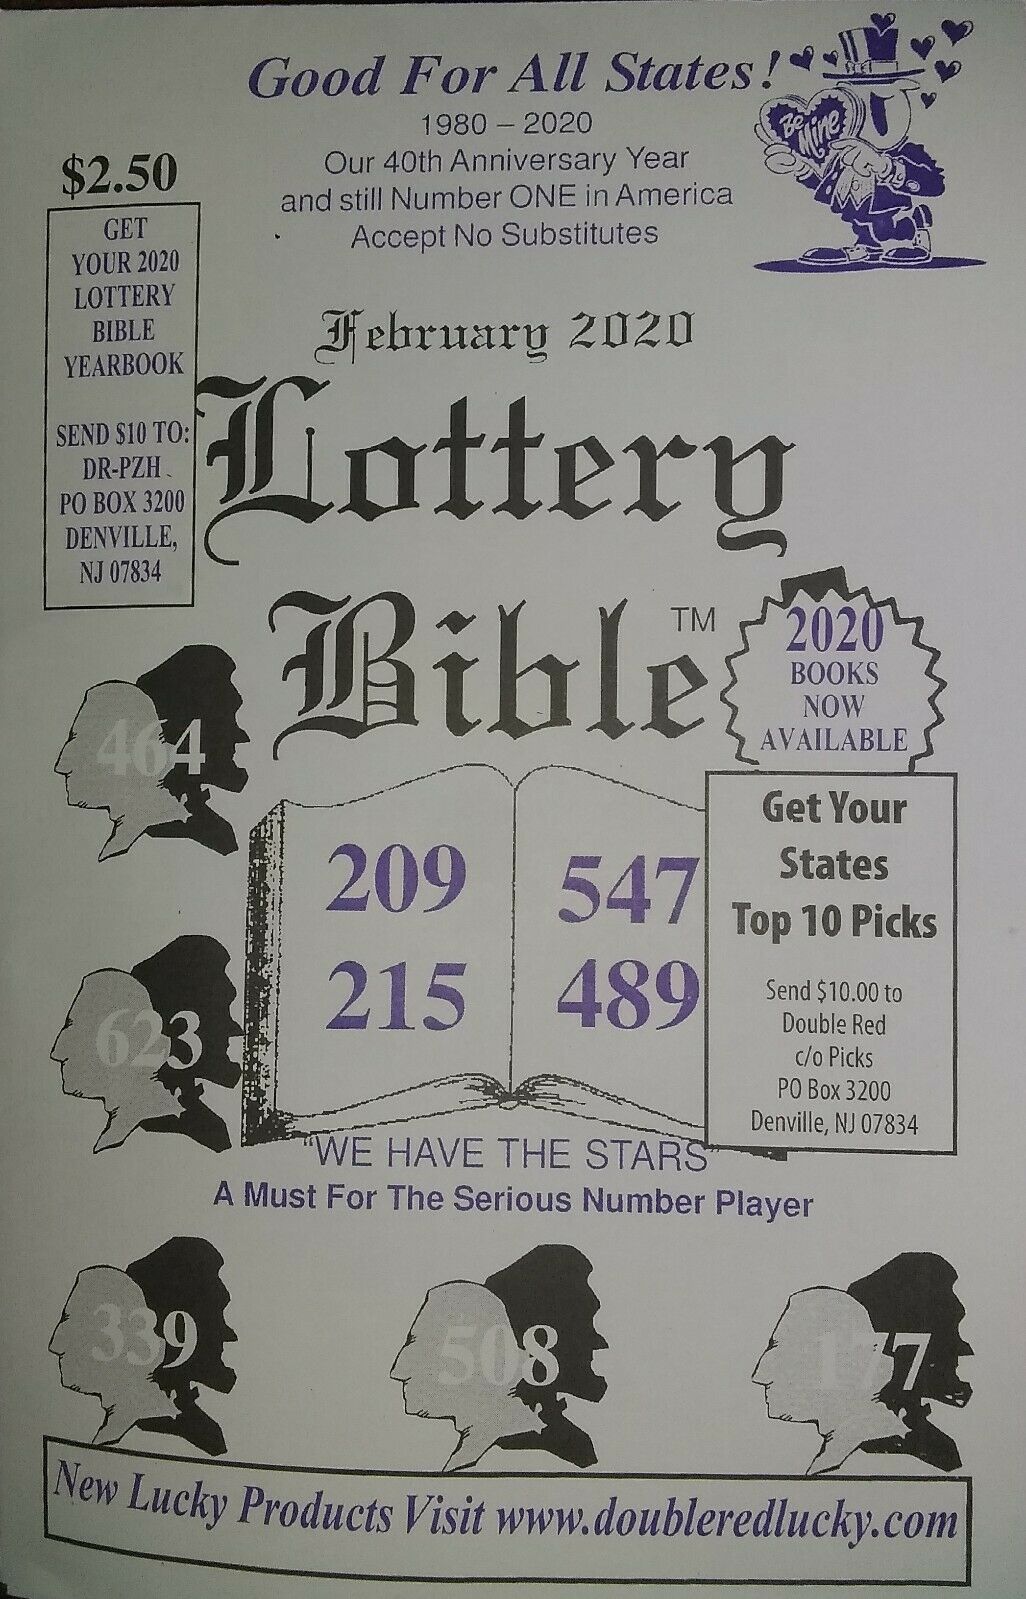 Lottery Bible February 2020 AllStates Pick 3 & 4 plus extra 123 5dimes